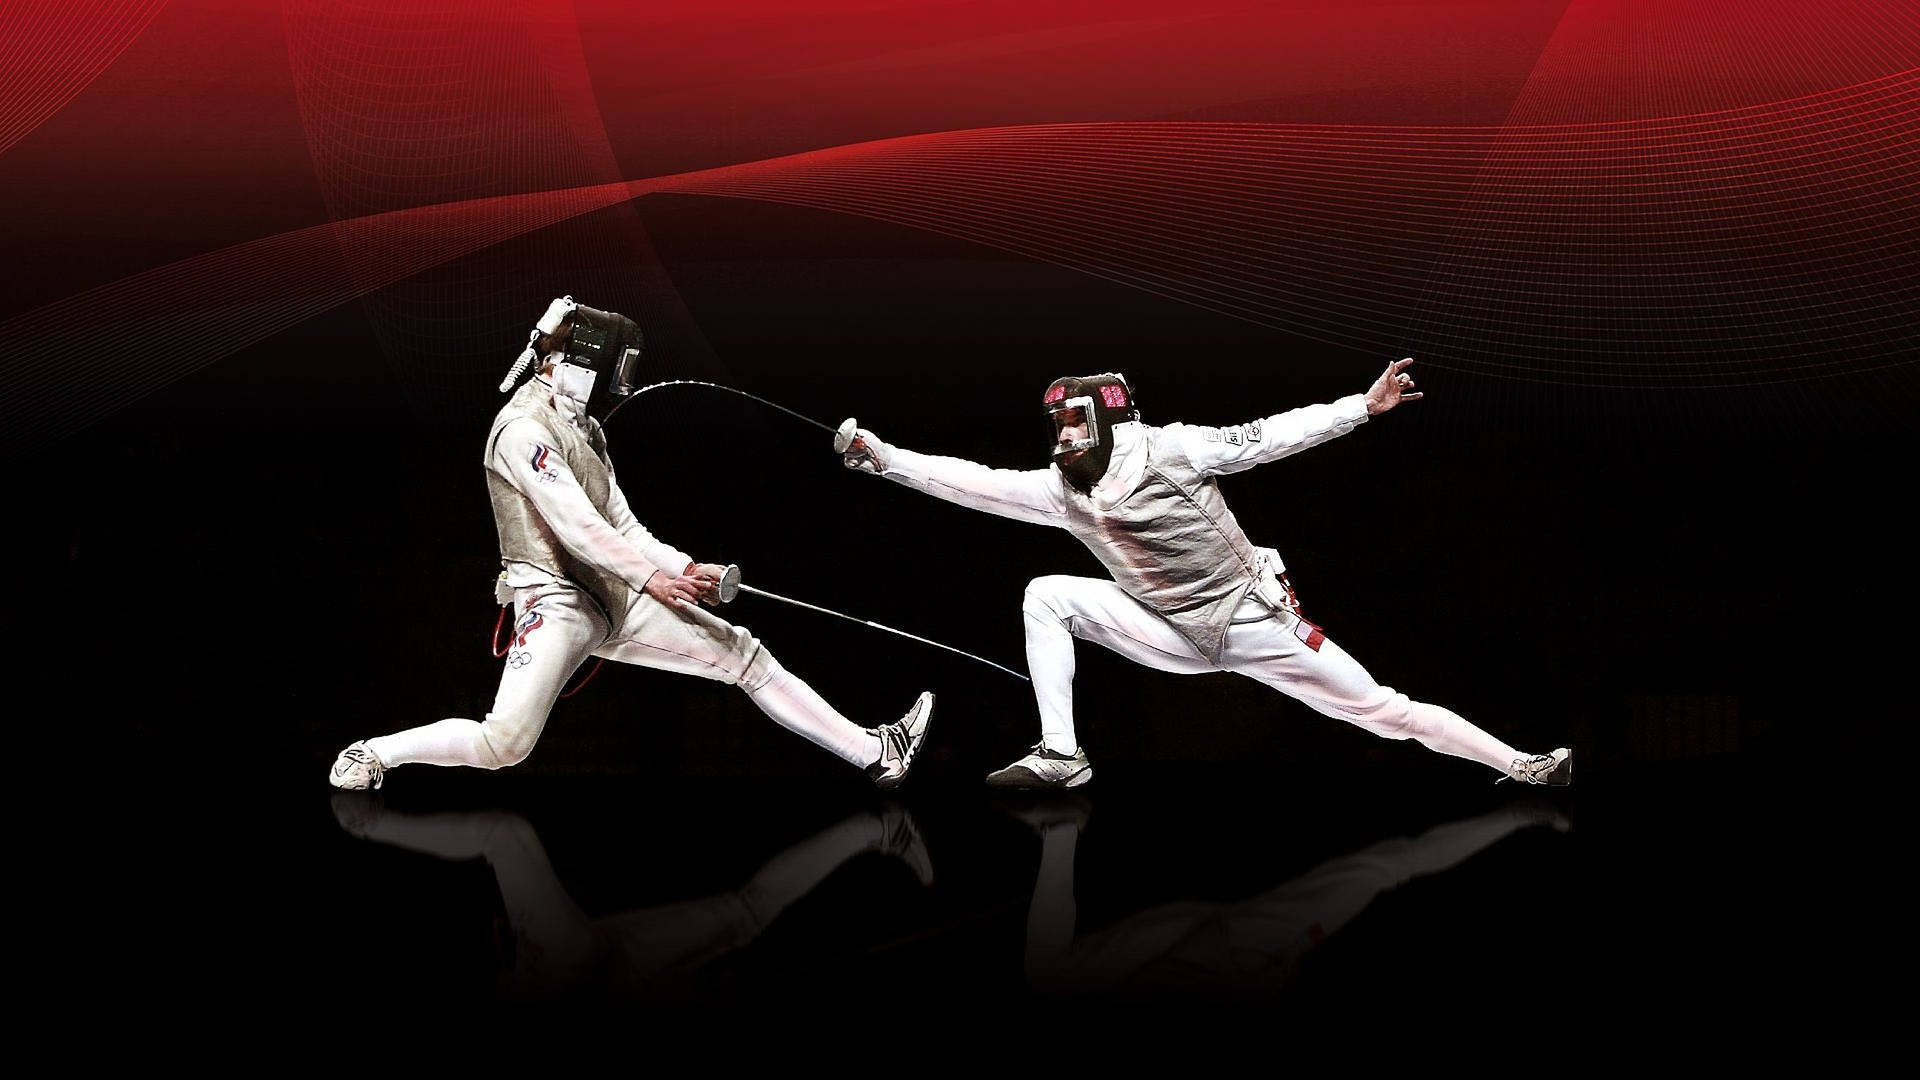 Fencing match photography wallpaper 